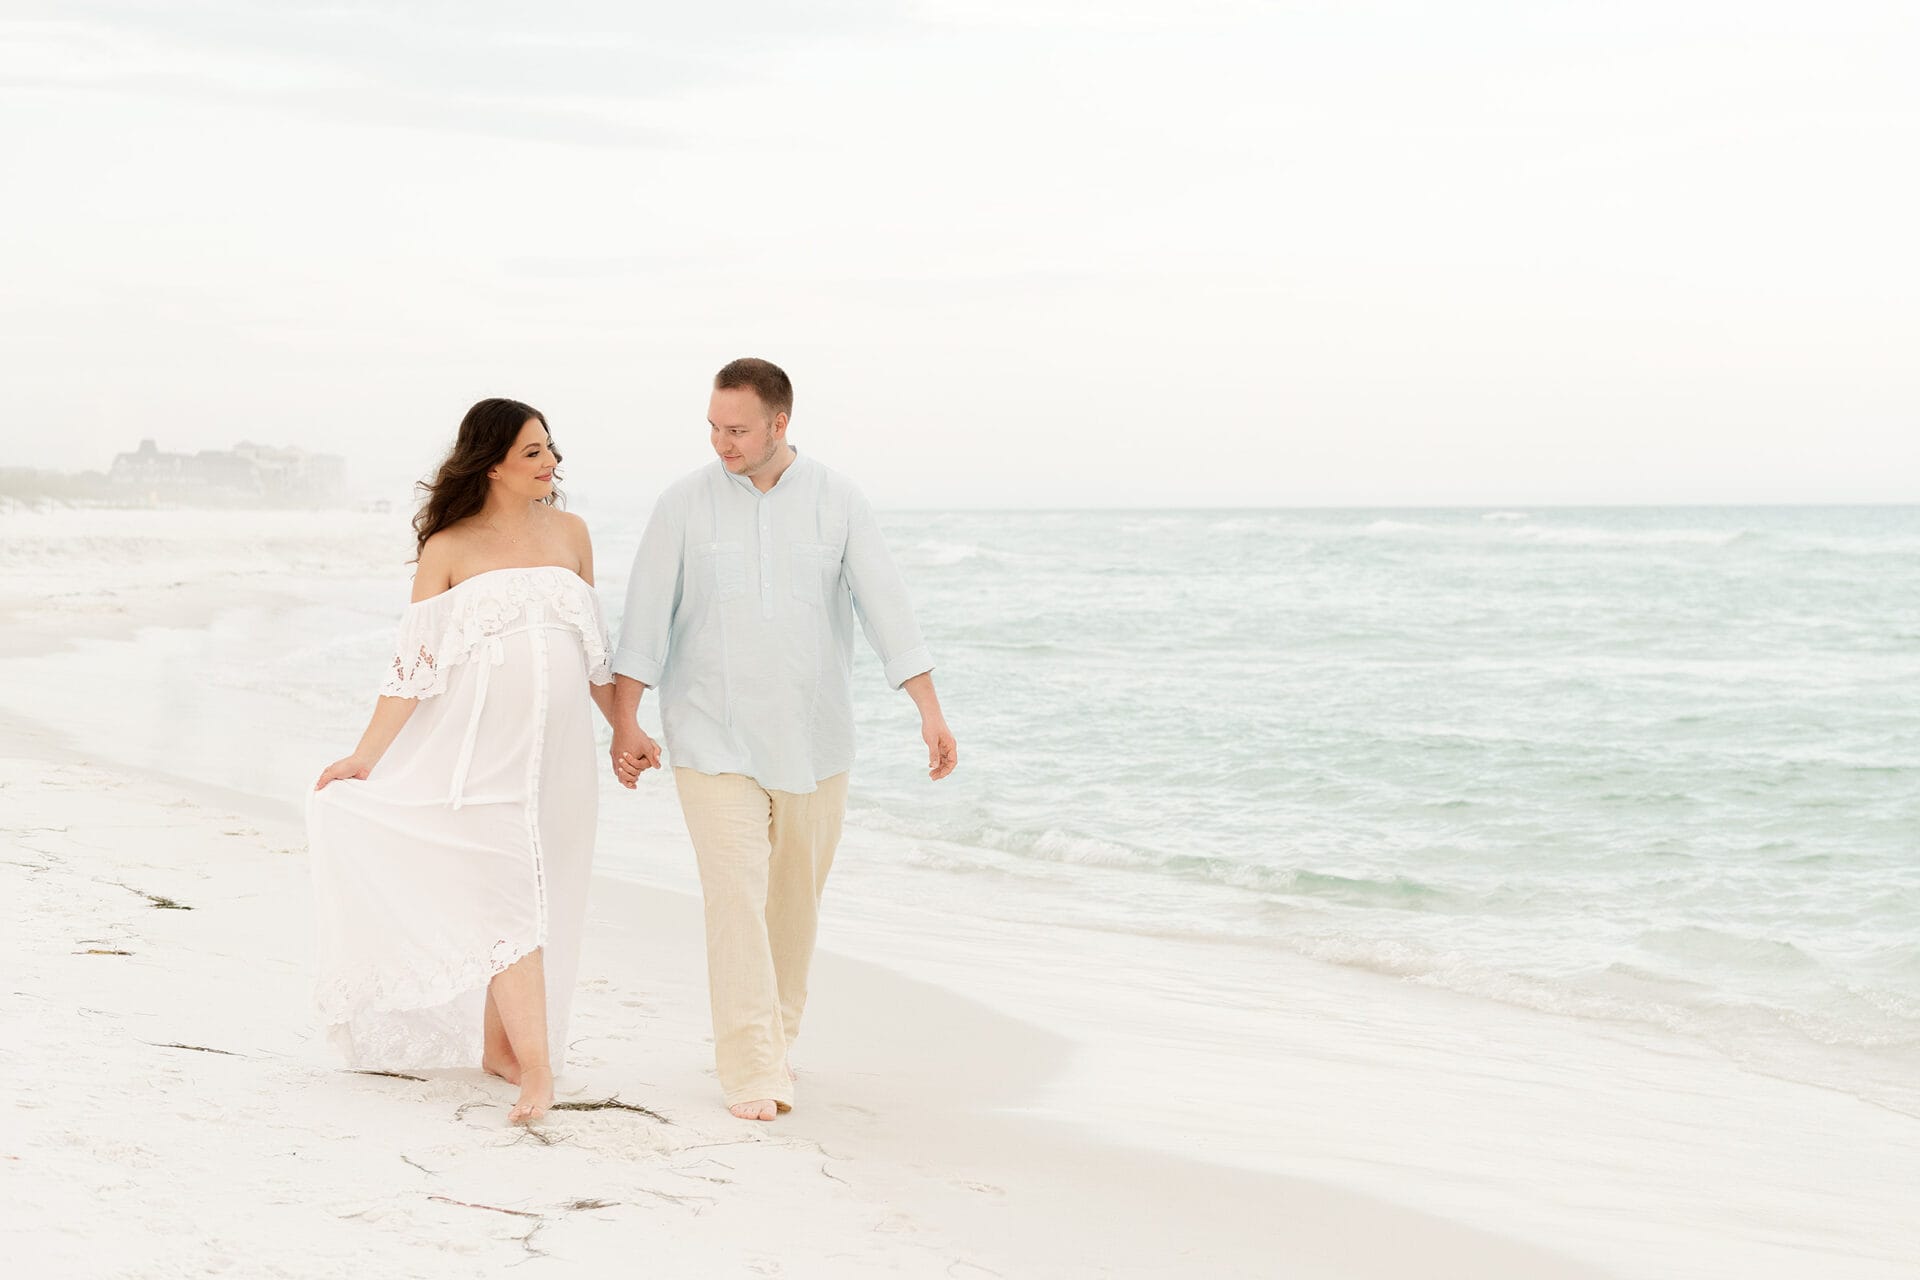 A couple strolling along the sandy beach, tightly grasping each other's hands, enjoying the picturesque scenery of Destin, FL.